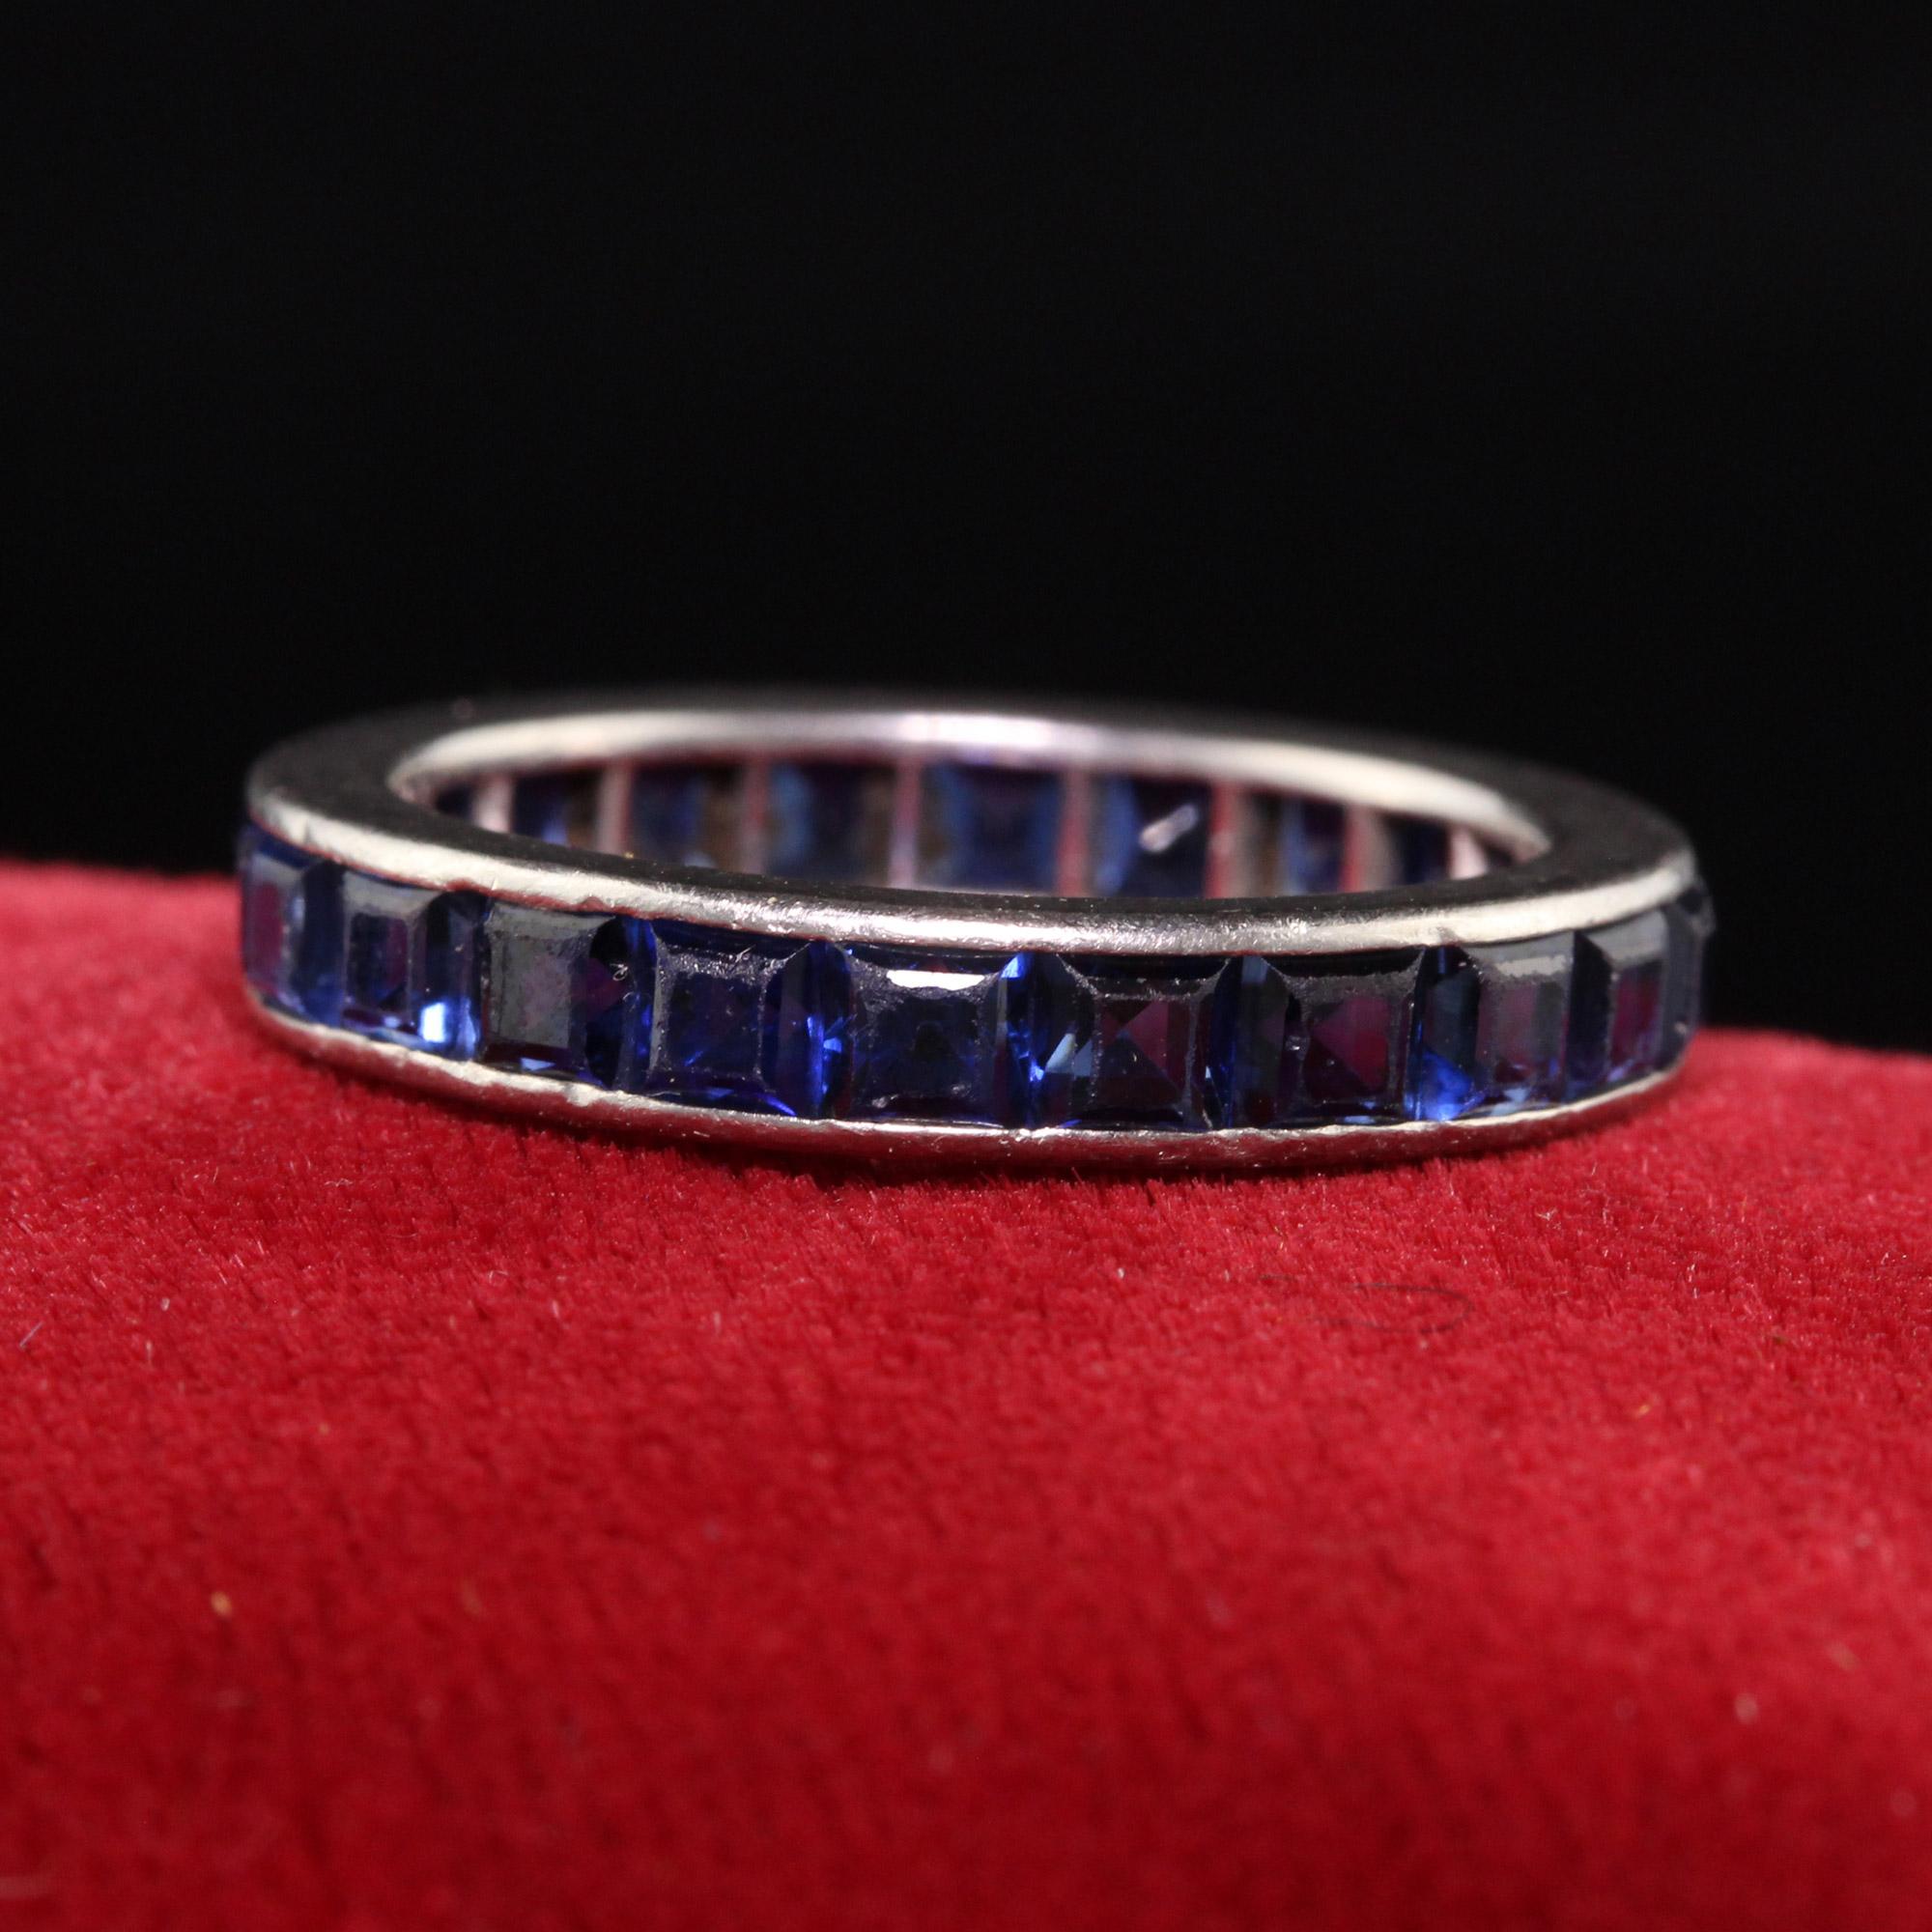 Beautiful Antique Art Deco Platinum Square Cut Sapphire Eternity Band. This incredible wedding band is crafted in platinum and has large square cut sapphires going around the entire ring.

Item #R1189

Metal: Platinum

Weight: 4.2 Grams

Size: 6